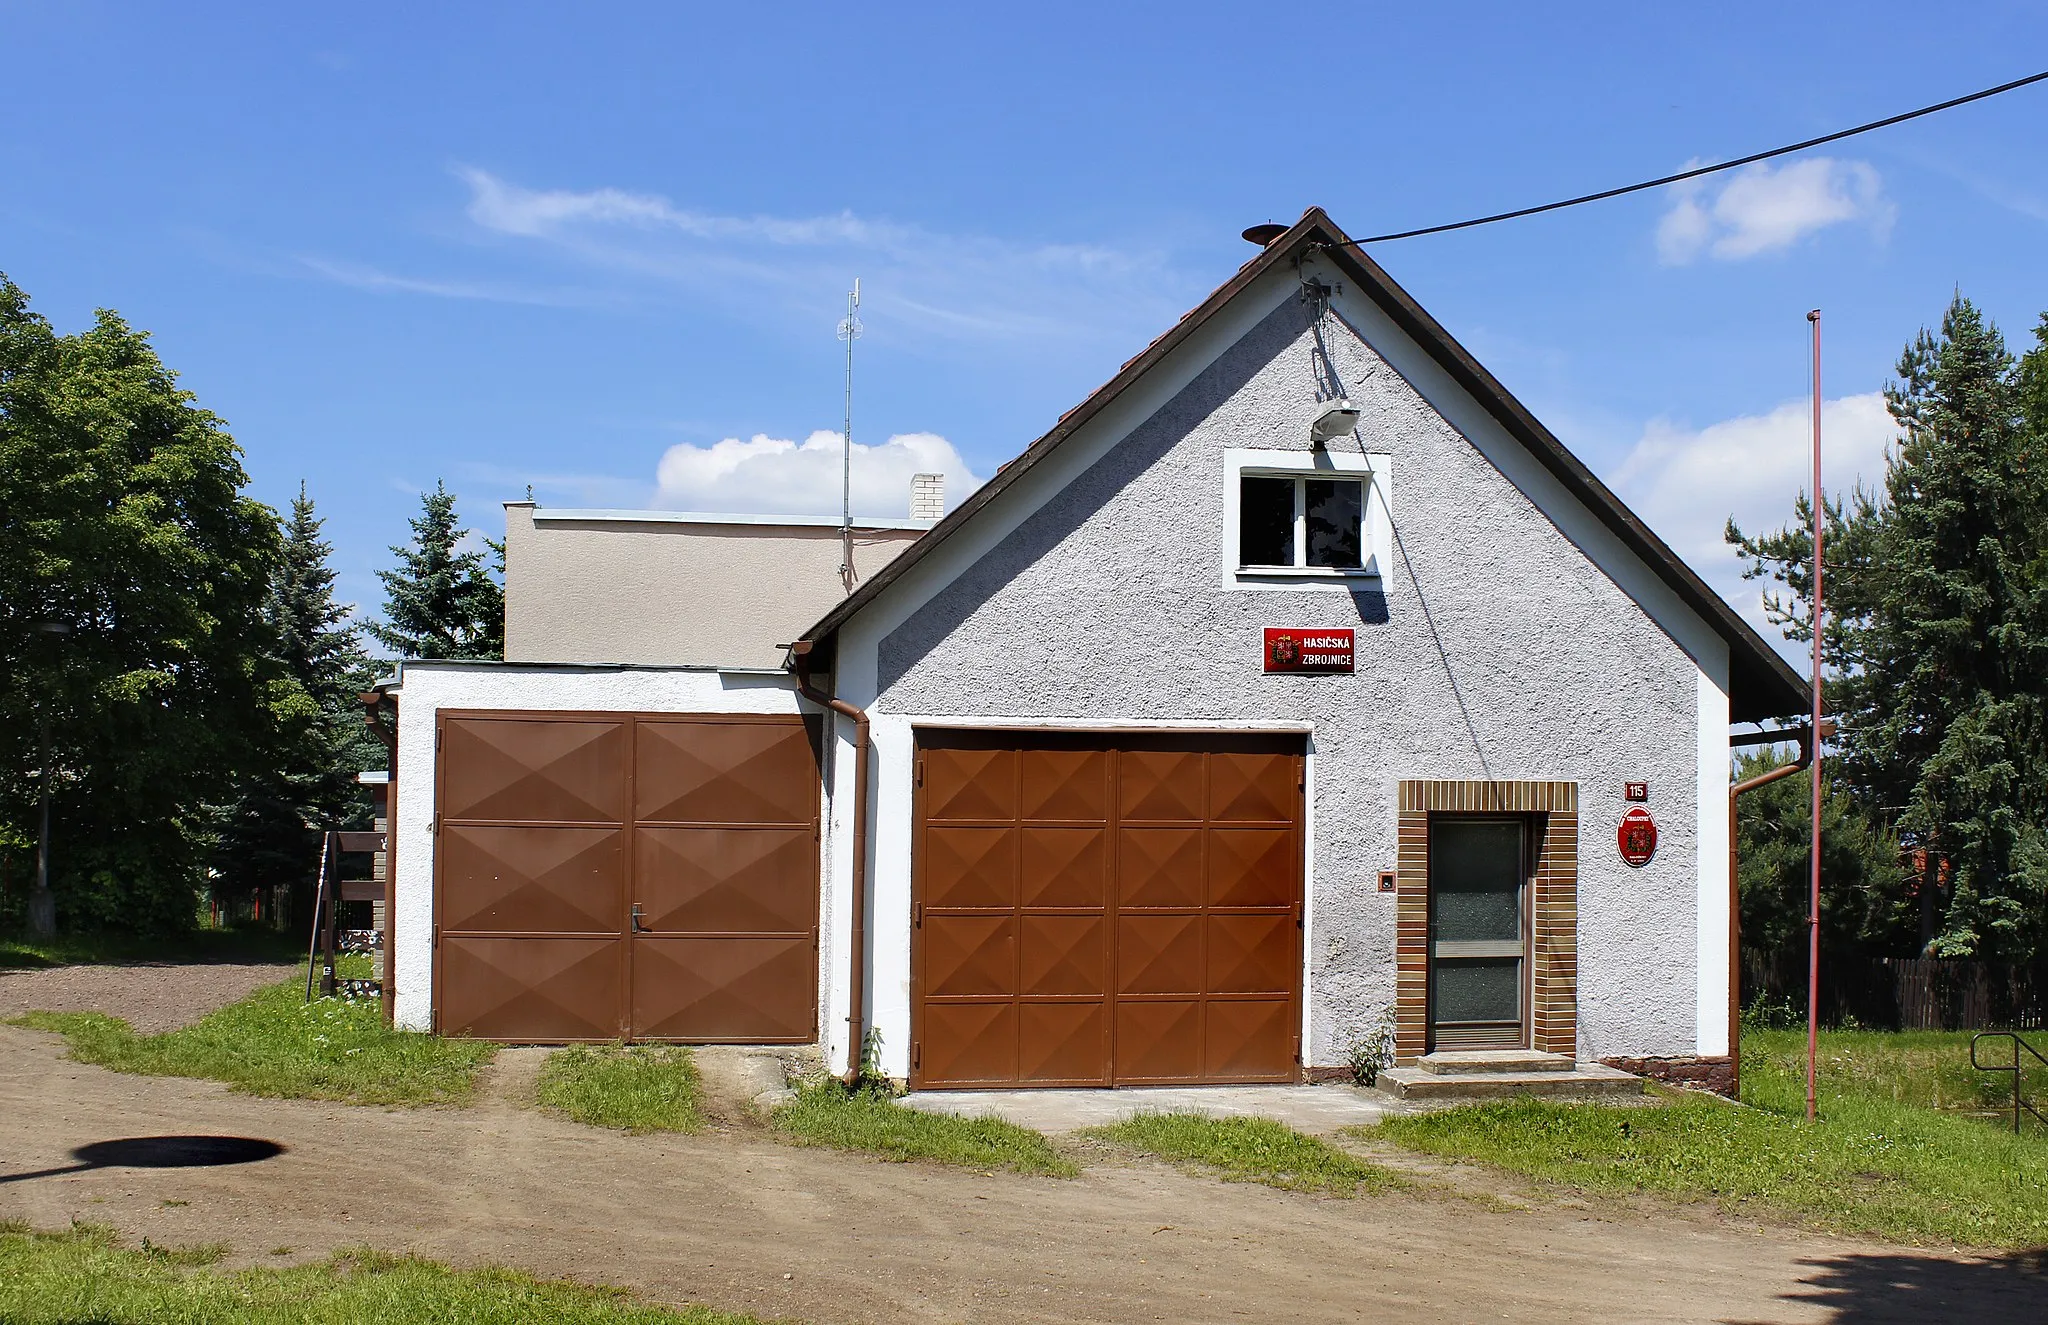 Photo showing: Fire station in Chaloupky village, Czech Republic